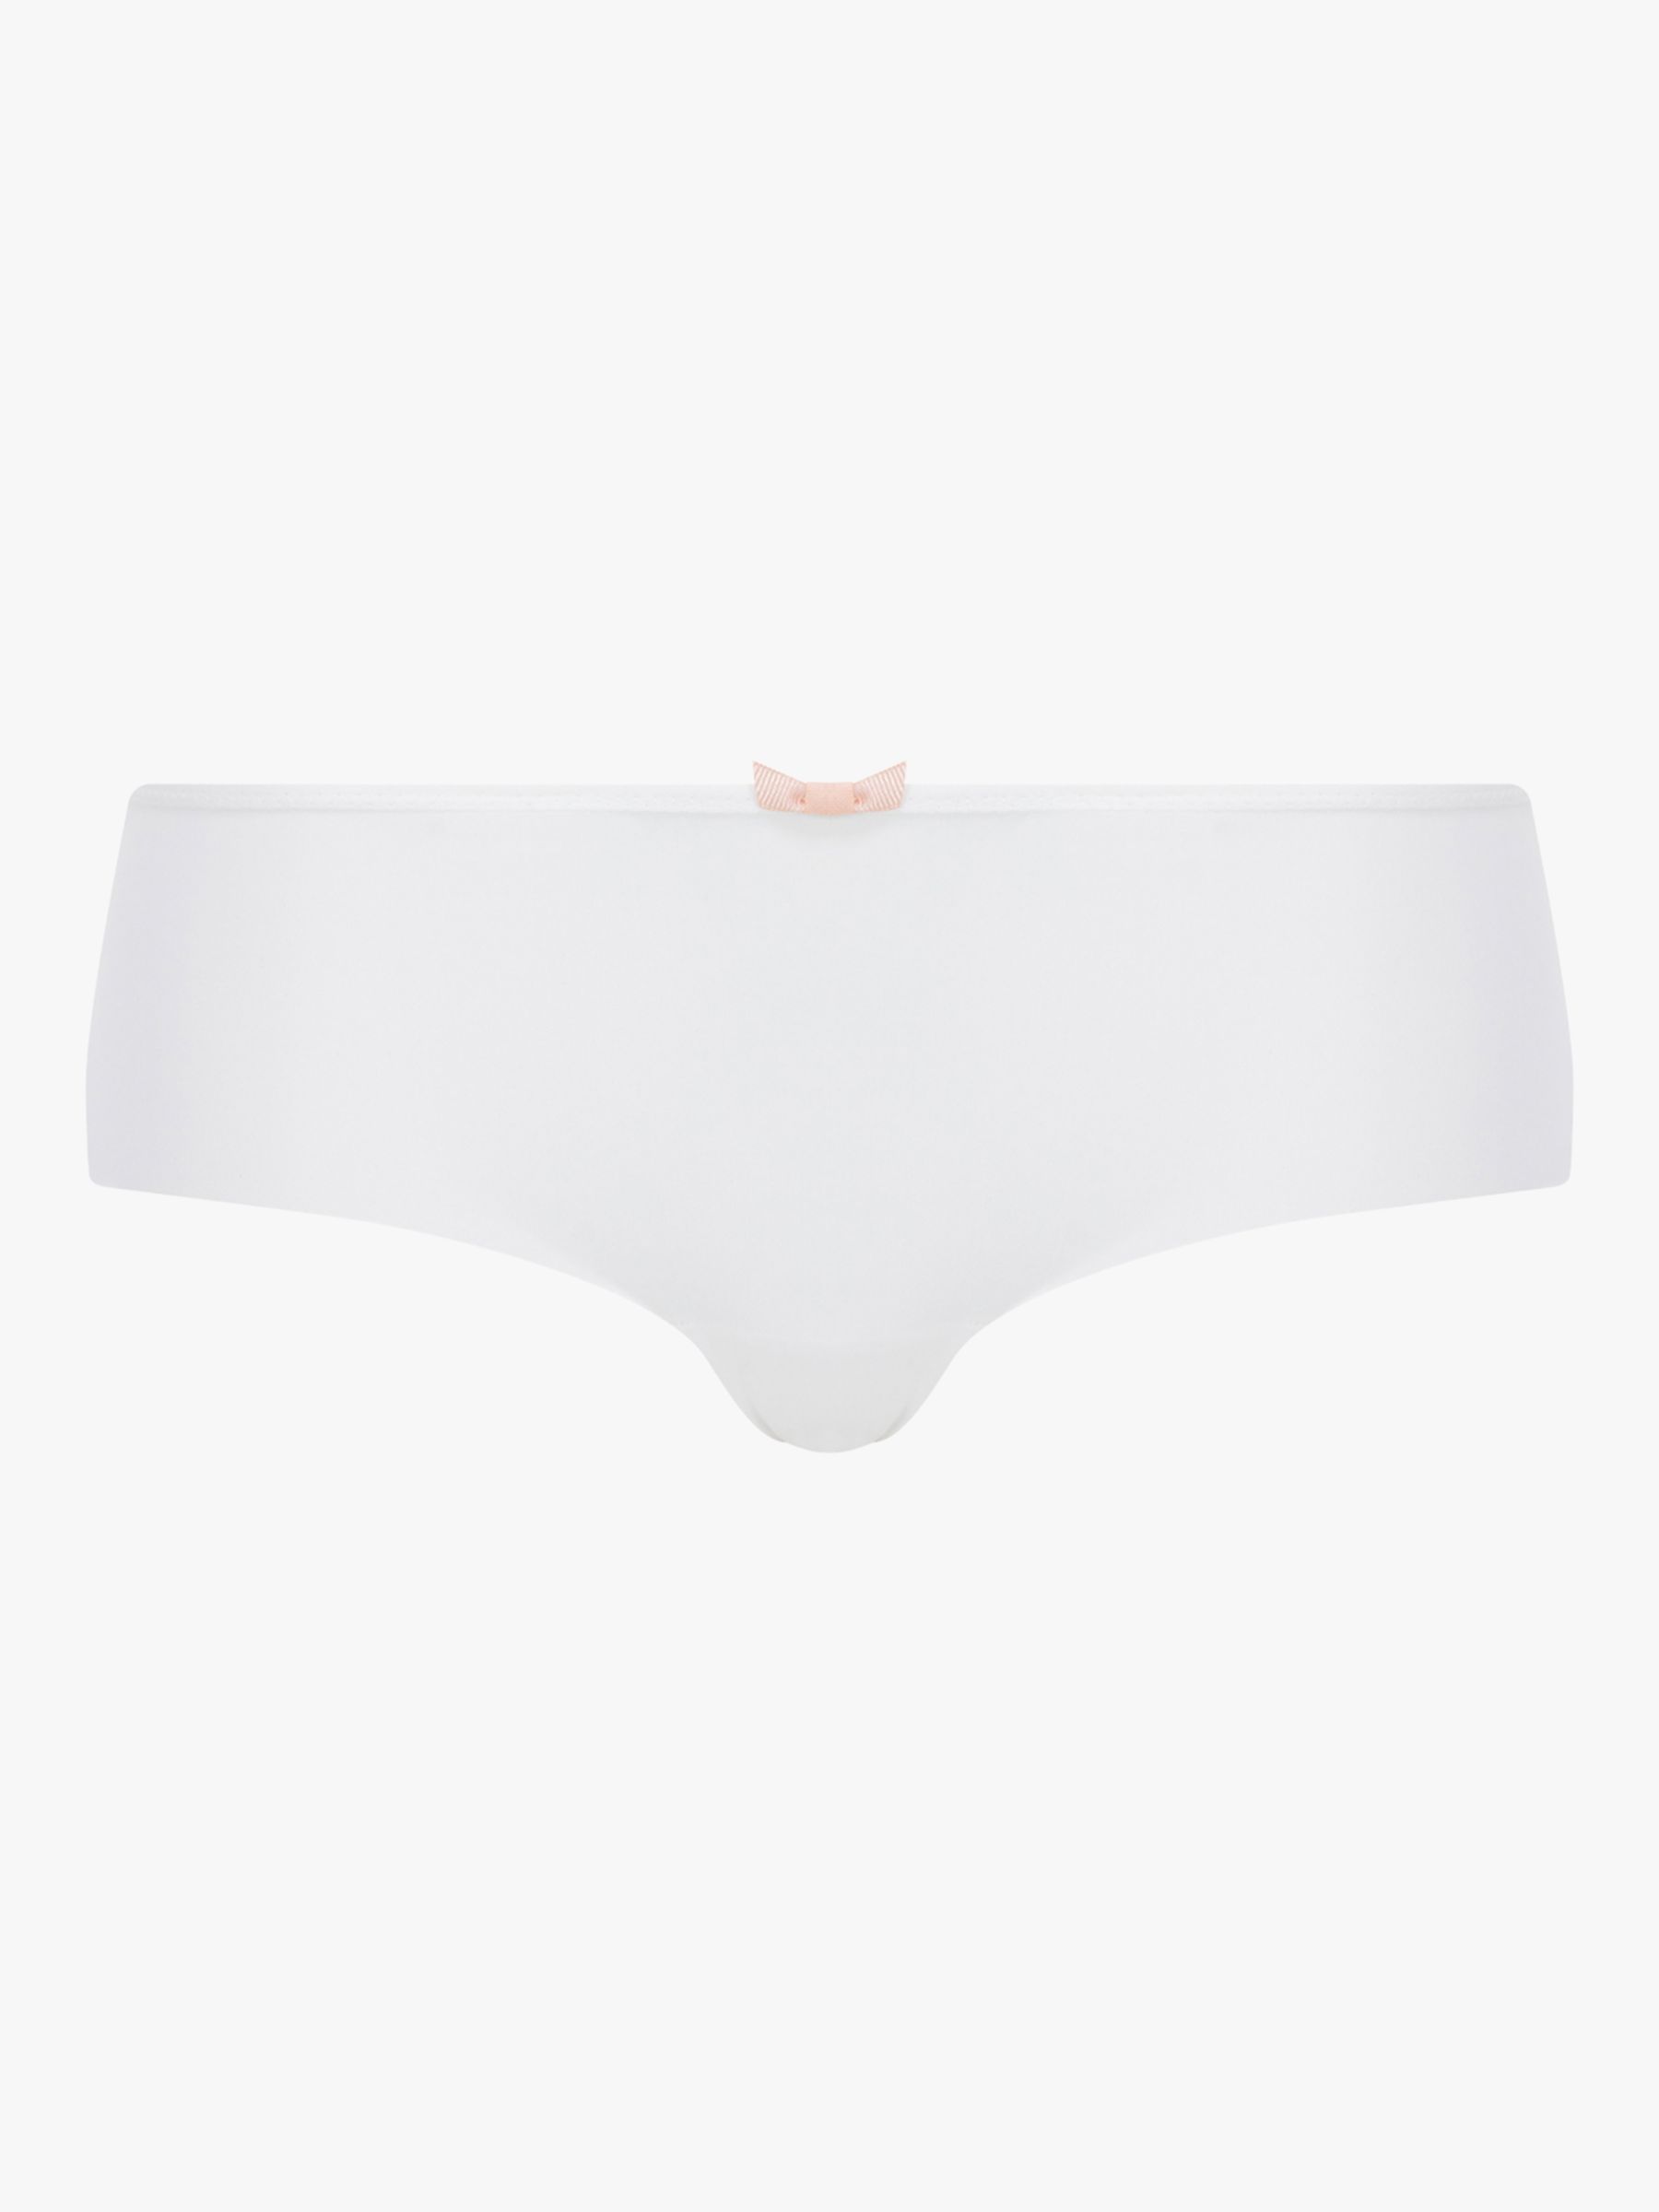 Buy Passionata Georgia Hipster Knickers Online at johnlewis.com